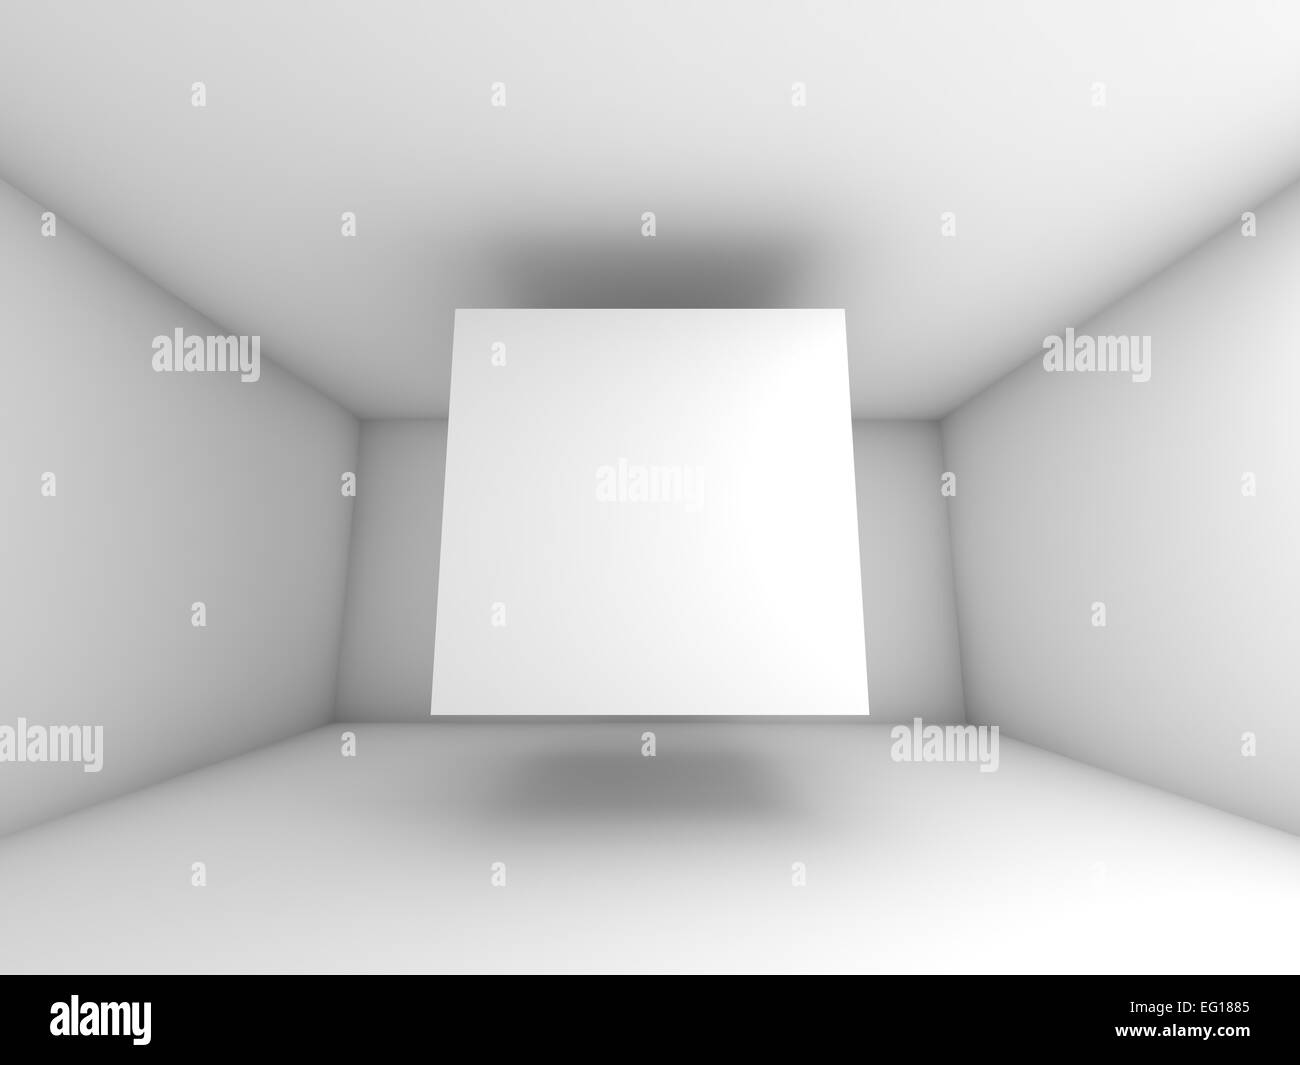 Abstract white room interior with flying cube. 3d background illustration Stock Photo